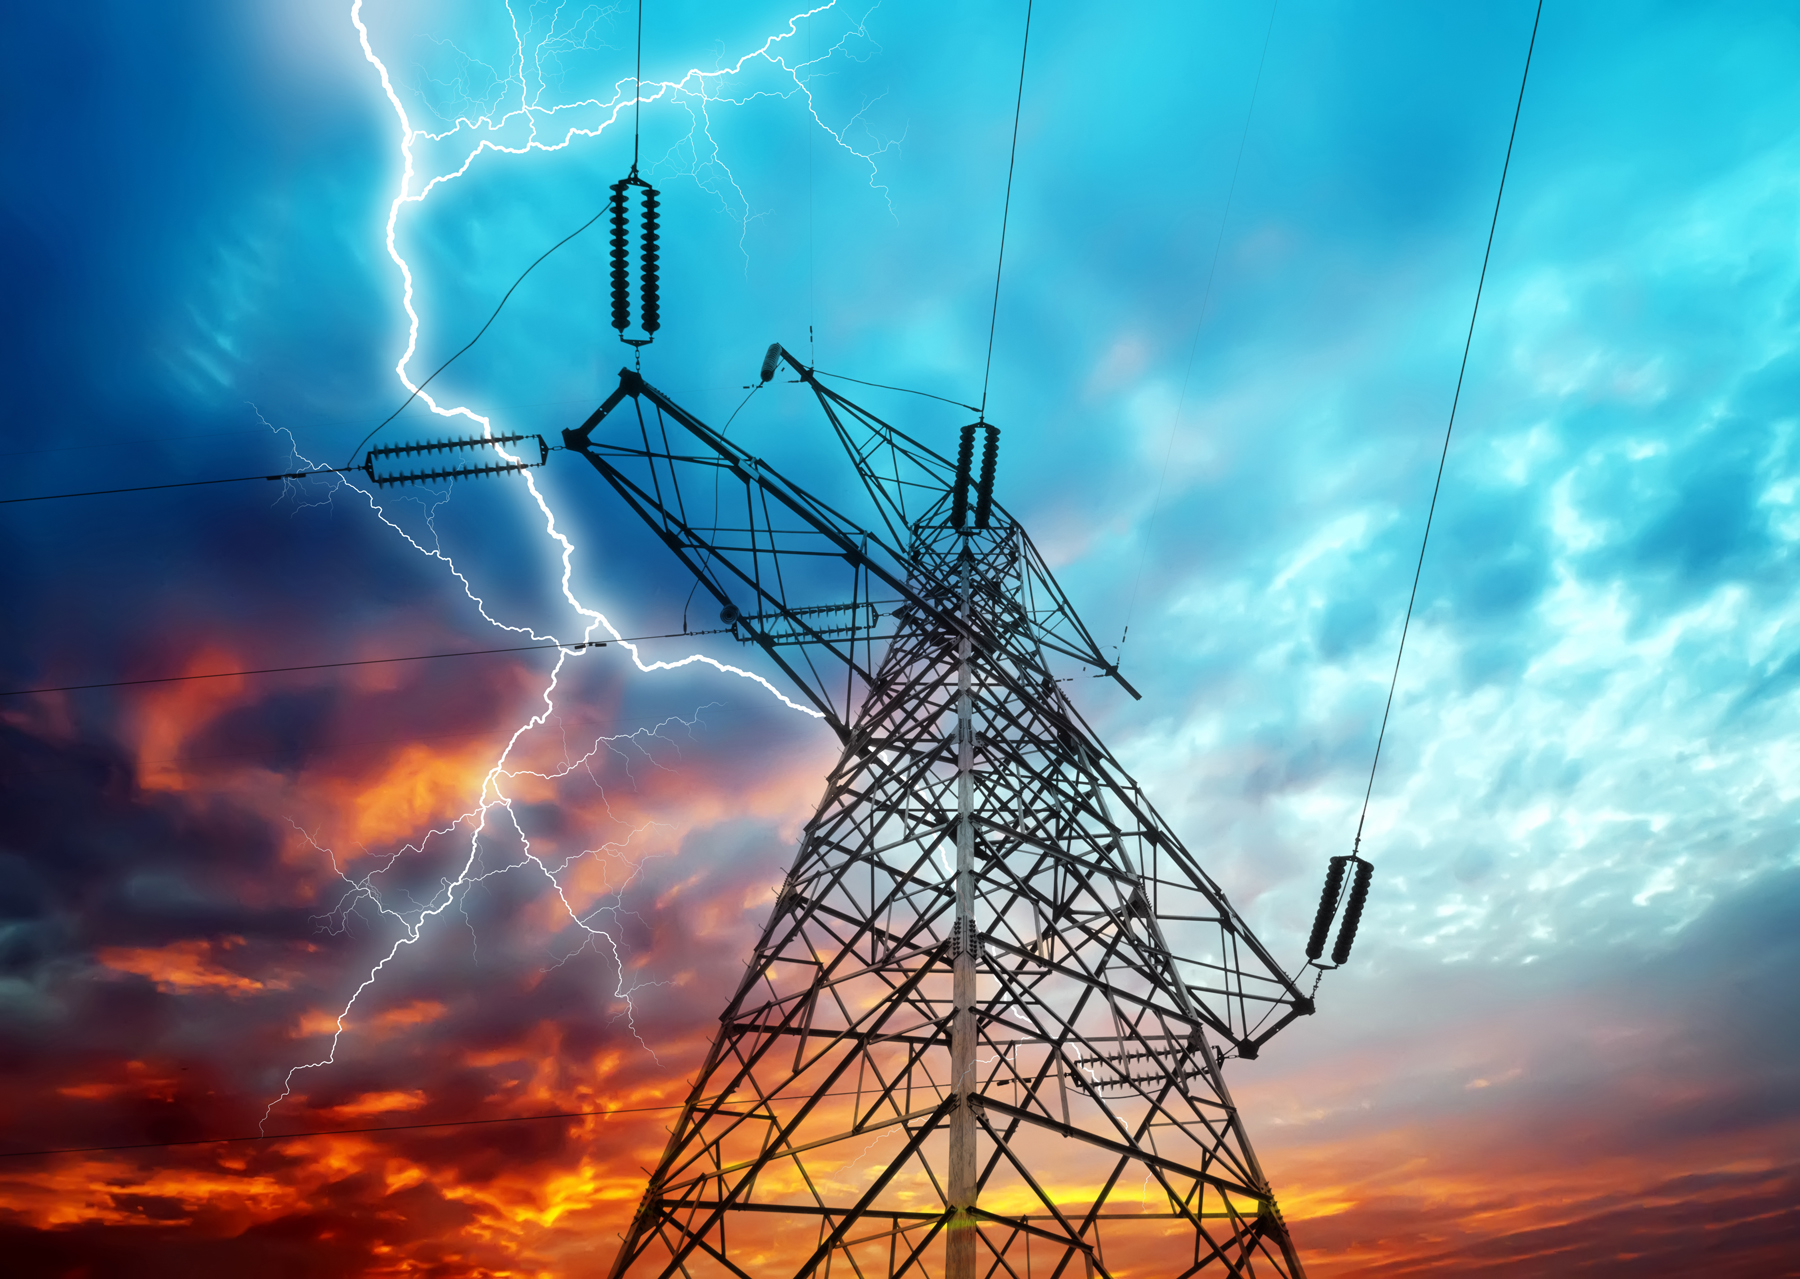 Software tracks abnormal power quality events | DEMM | Engineering and